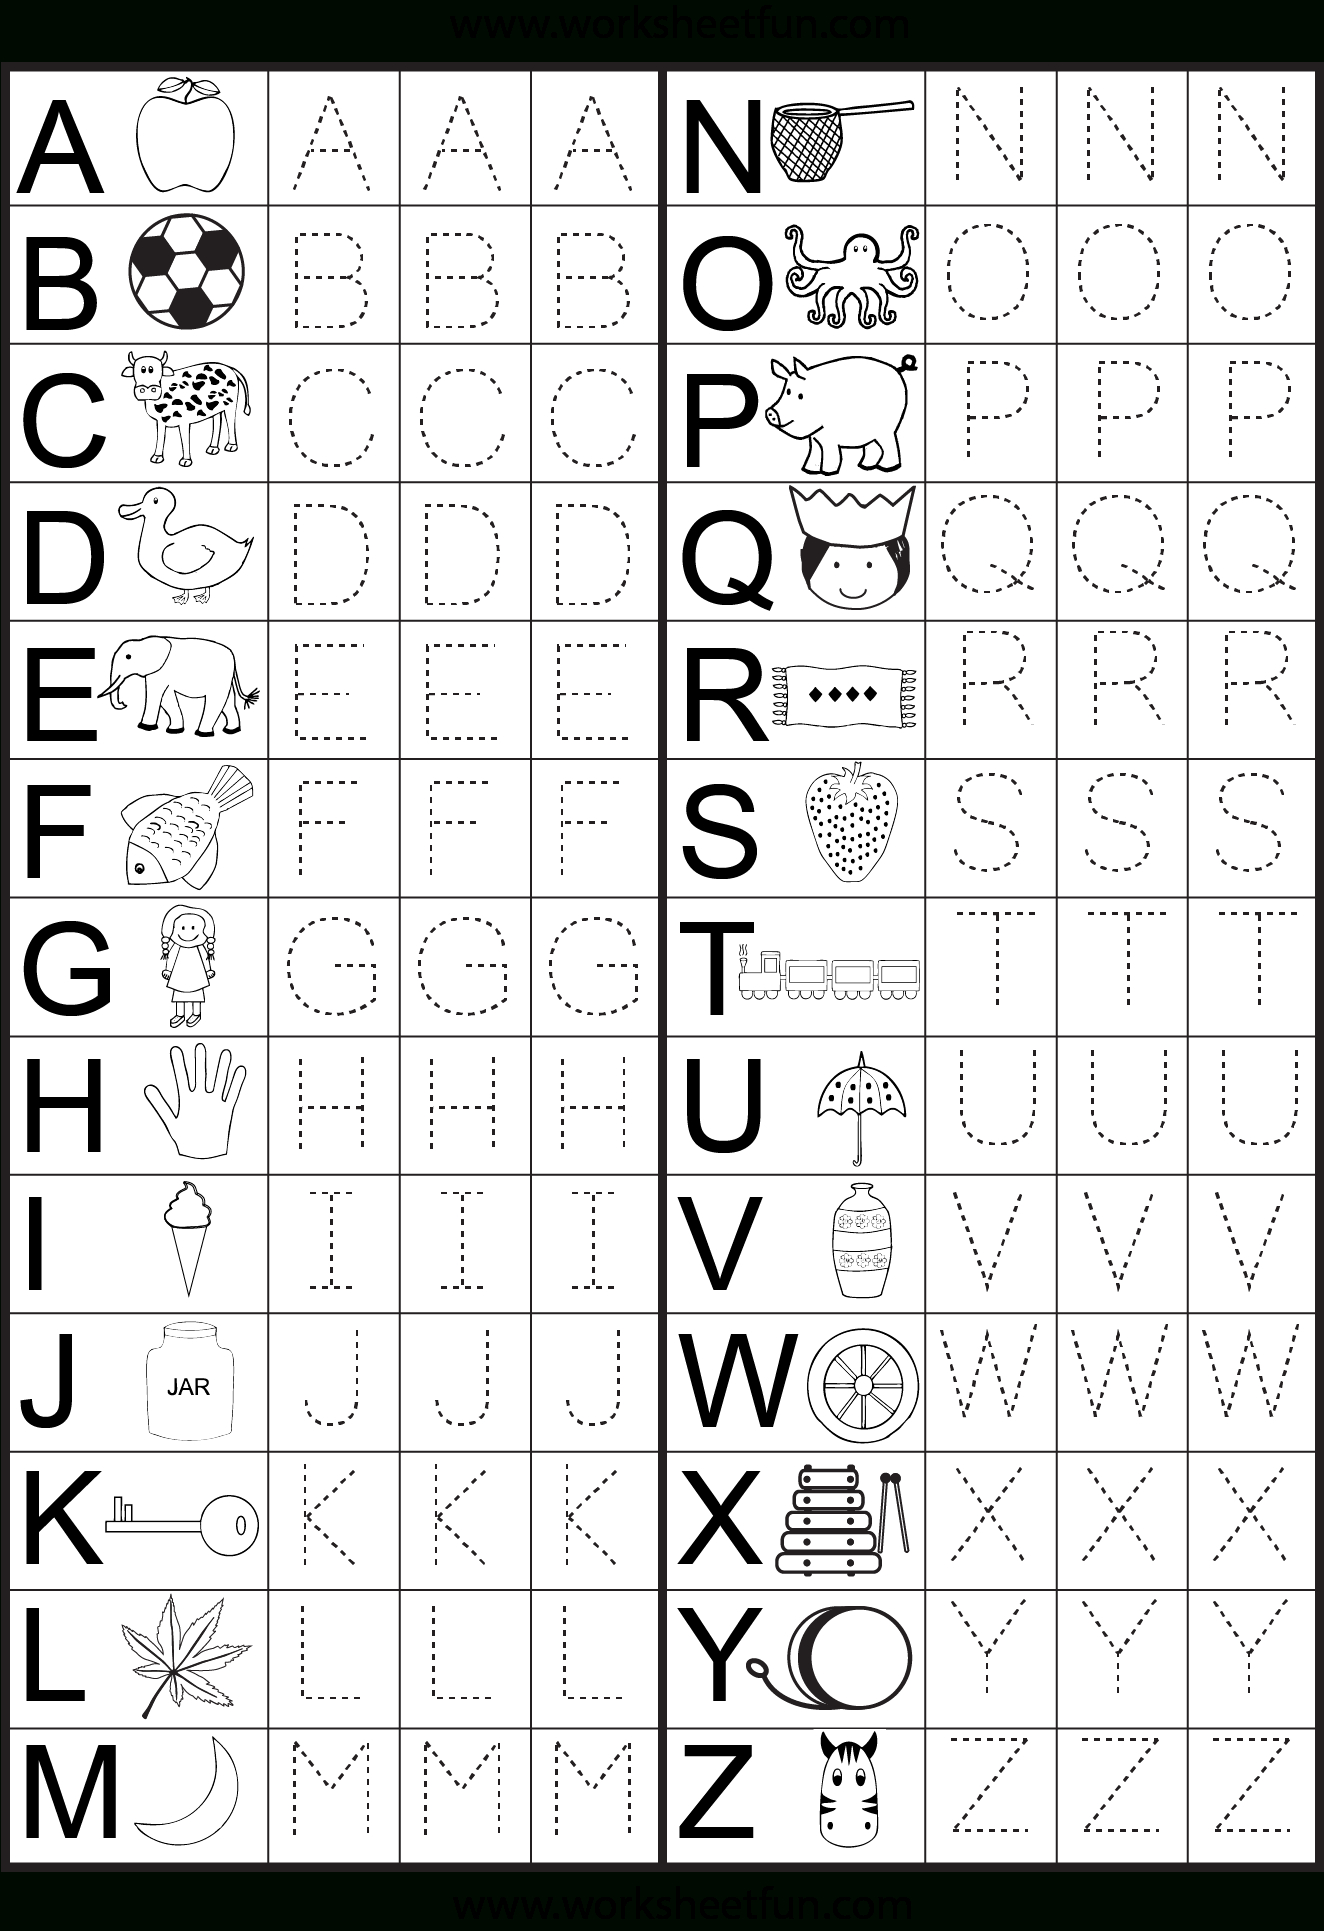 Great, Great, Great Website! So Many Printable Worksheets with regard to Grade 1 Alphabet Tracing Worksheets